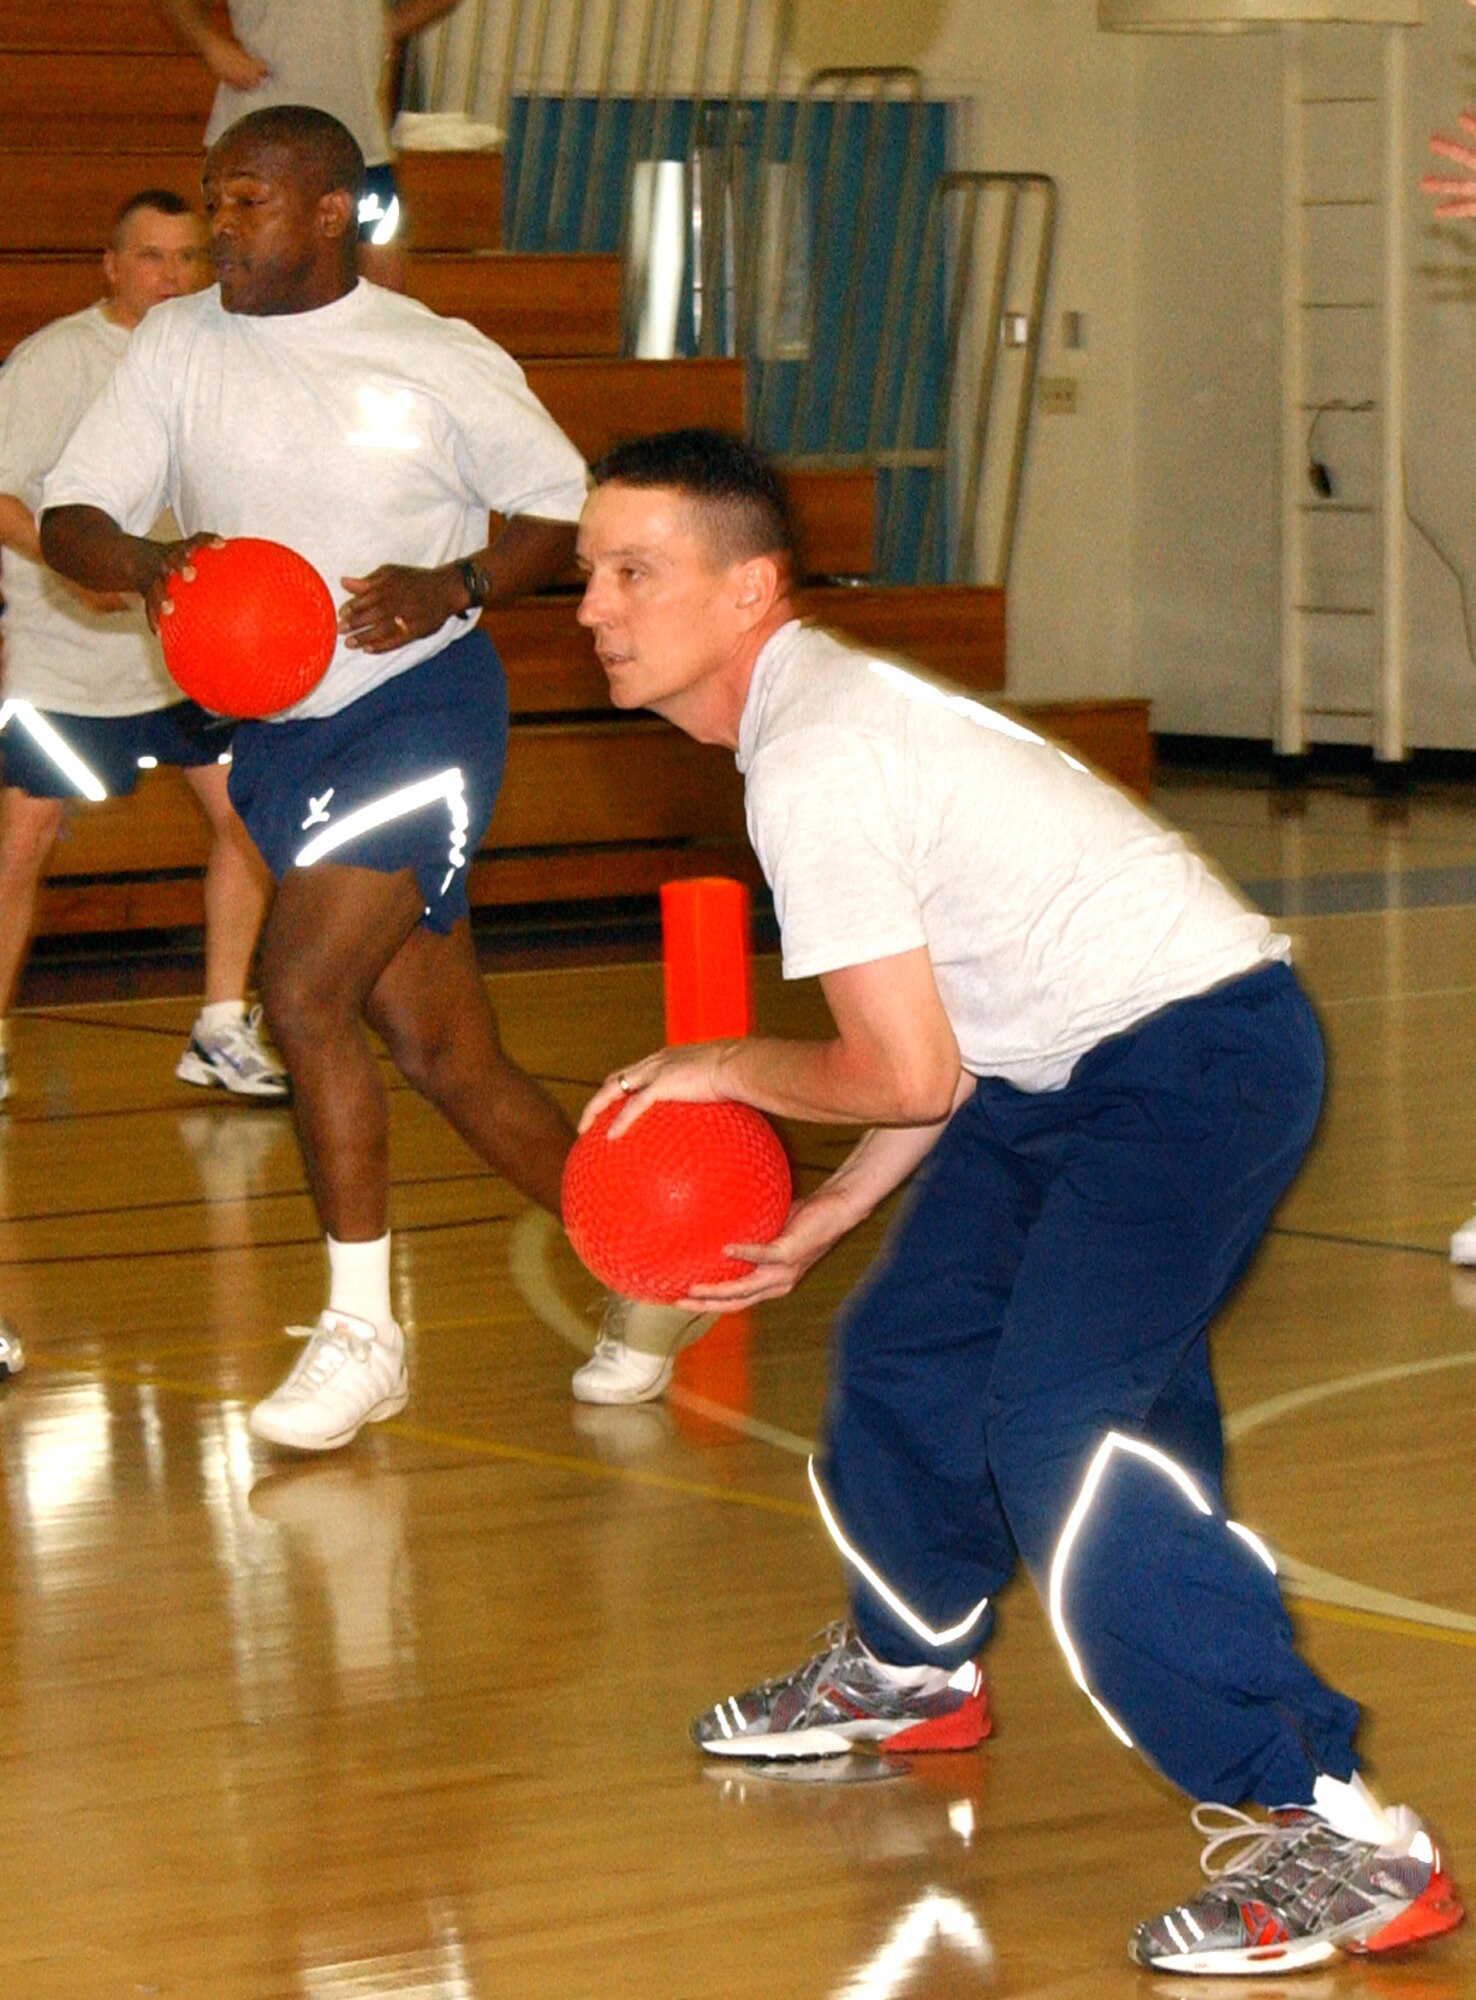 Chief Brye McMillon [left] targets an opponent on the Eagles team while Chief Timothy Pritchett prepares to deflect a ball. (U.S. Air Force photo by Nan Wylie)